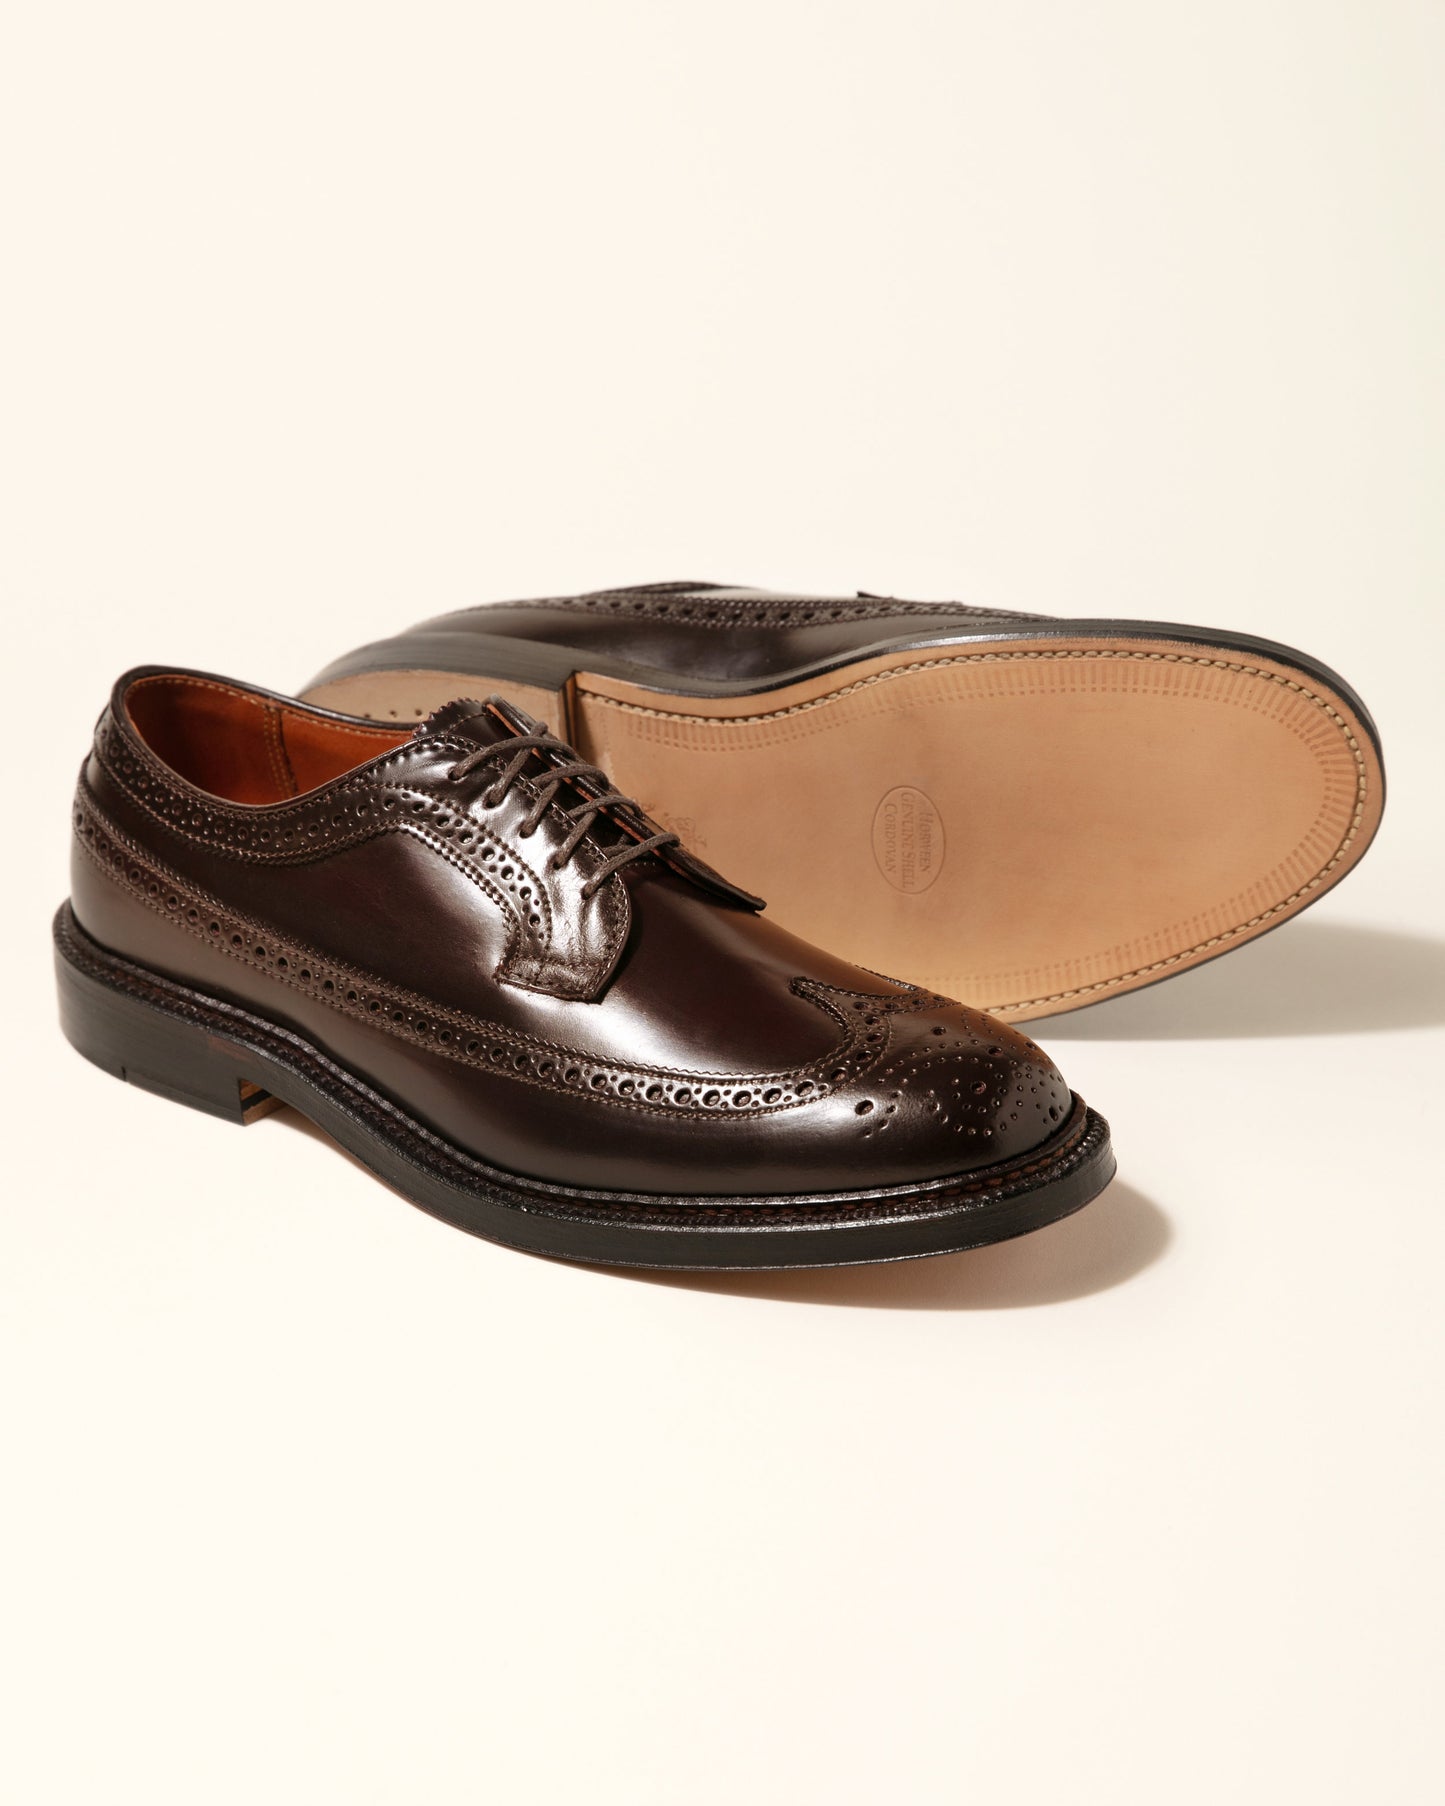 975 Color 8 Shell Cordovan Longwing Blucher